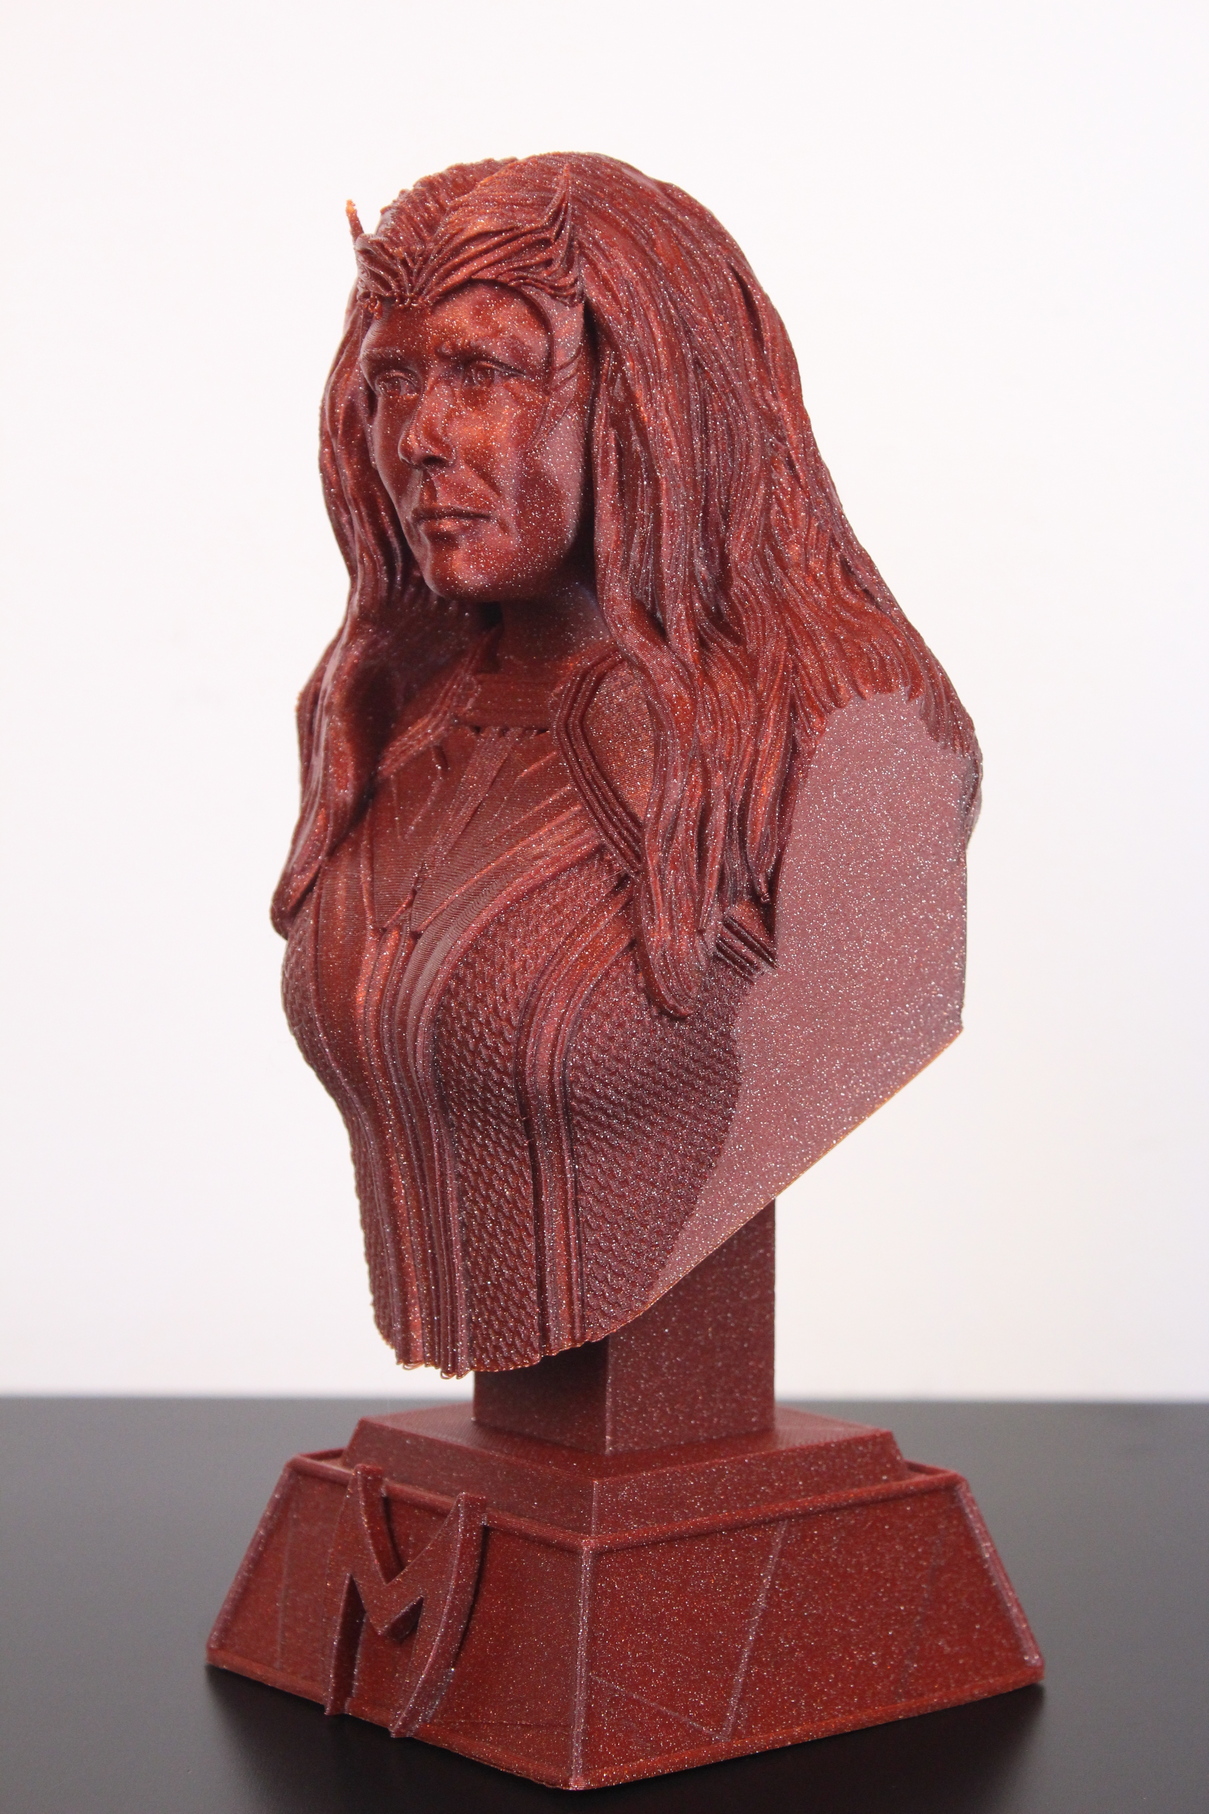 Scarlet Witch printed on the Voxelab Aries 5 | Voxelab Aries Review: A Worthy Upgrade for the Aquila?